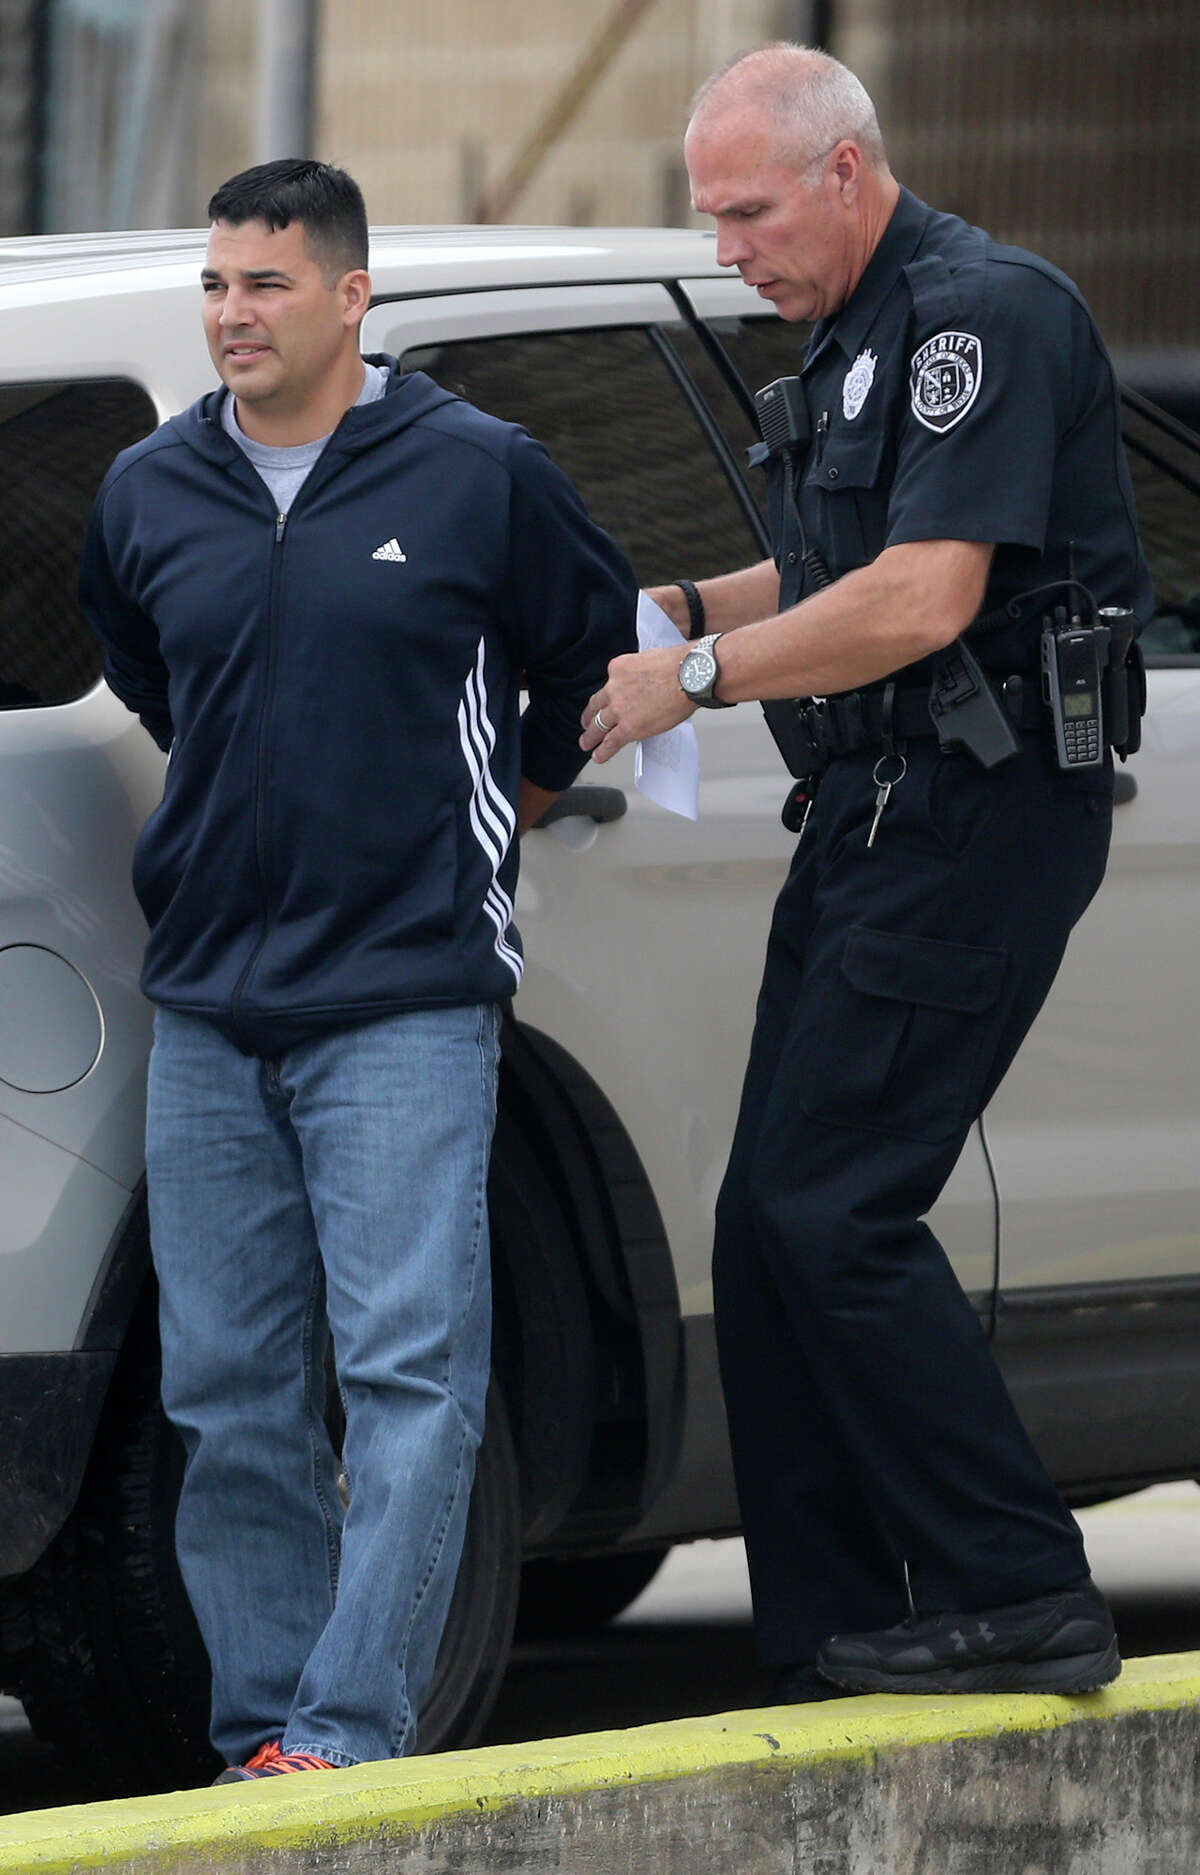 Leonardo Ramos,39, (left) is escorted into the magistrate's office Thursday April 23, 2015. He faces a charge of indecency with a child. Ramos was teaching at the Jubilee Academic Center according to Bexar County Sheriff's spokesman James Keith.